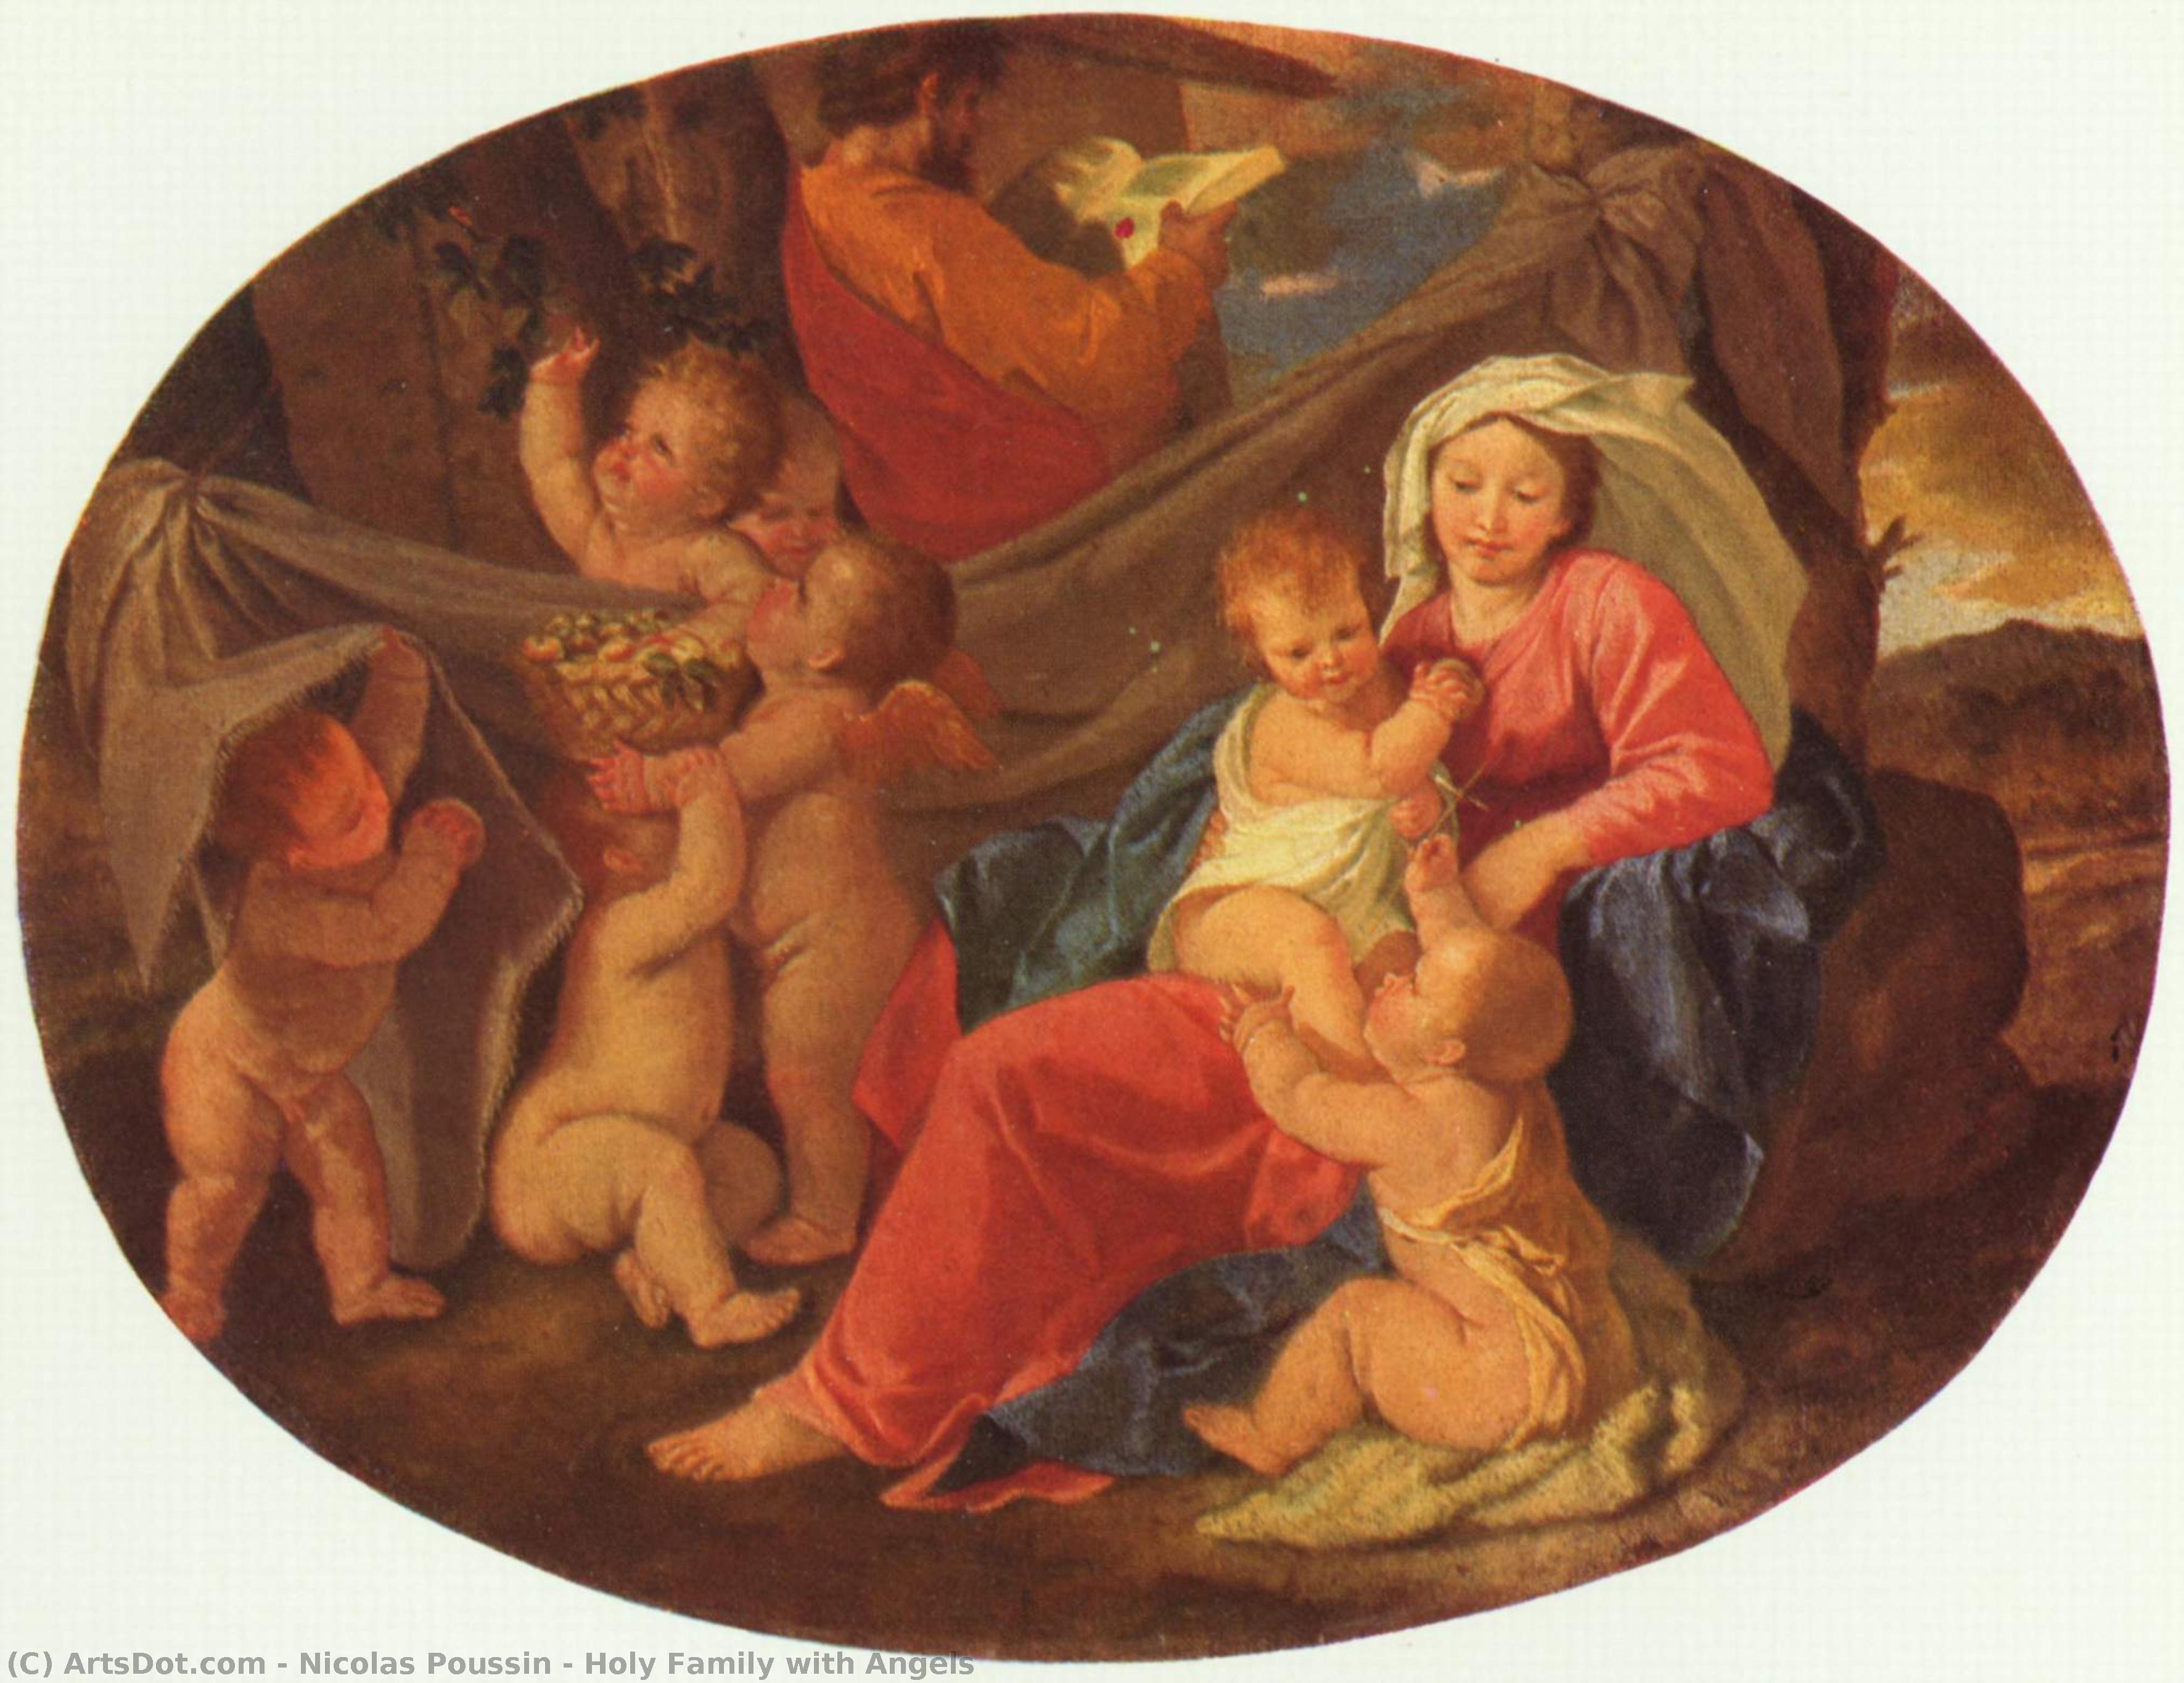  Artwork Replica Holy Family with Angels, 1630 by Nicolas Poussin (1594-1665, France) | ArtsDot.com